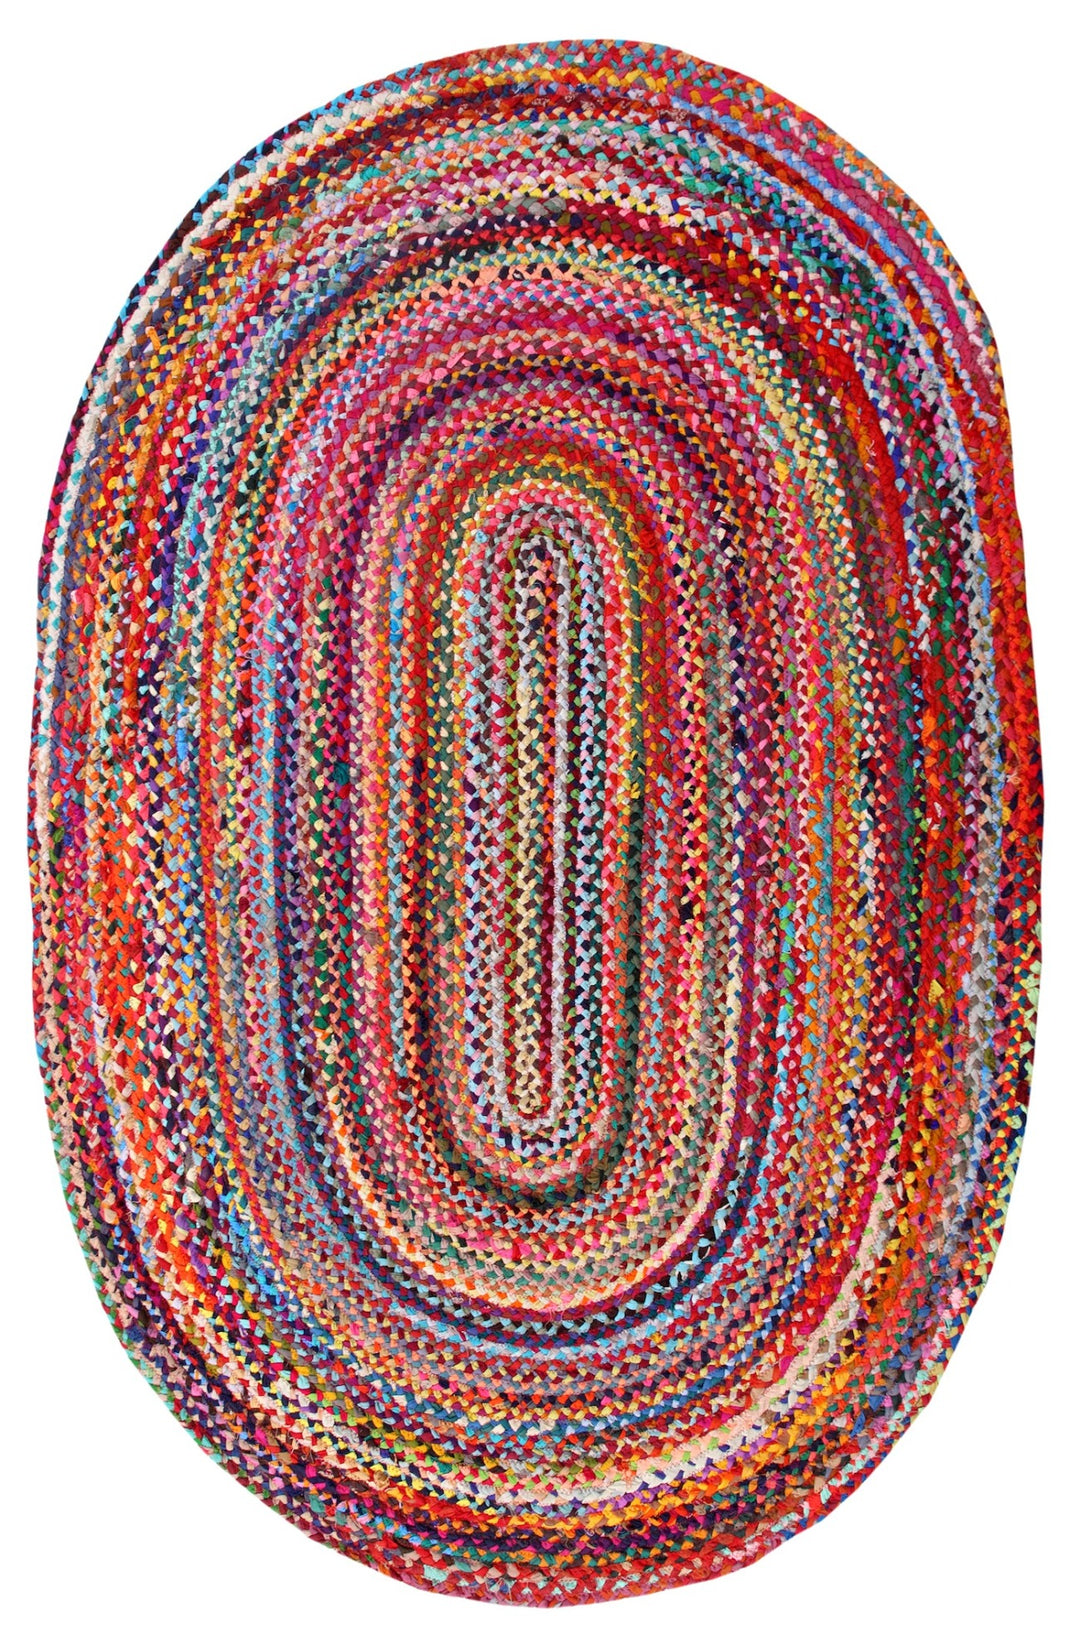 SUNDAR Oval Multicolour Rug Ethical Source with Recycled Fabric